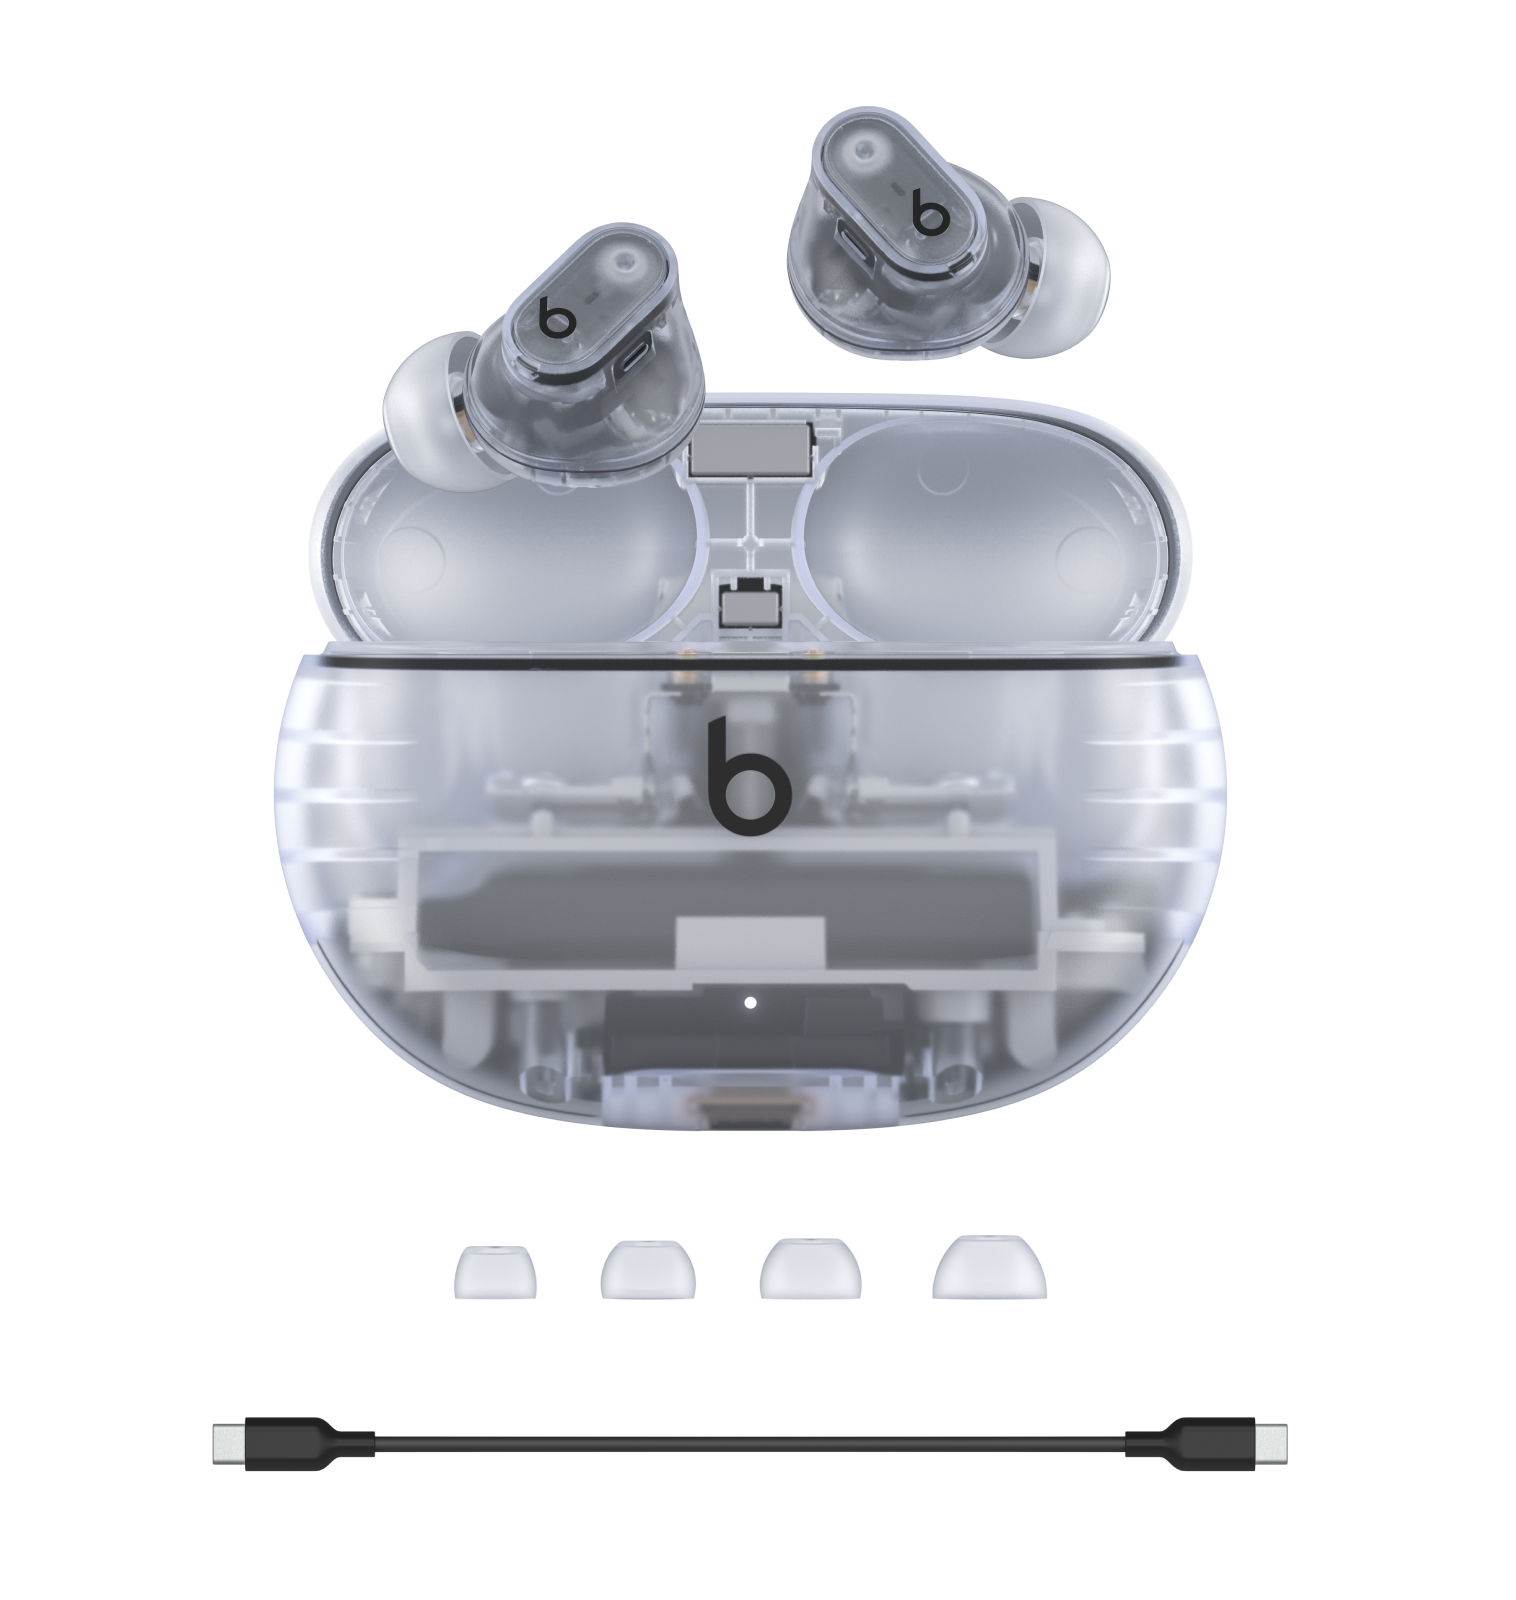 Beats Studio Buds + case, earbuds, ear-tips, and cord in Transparent.